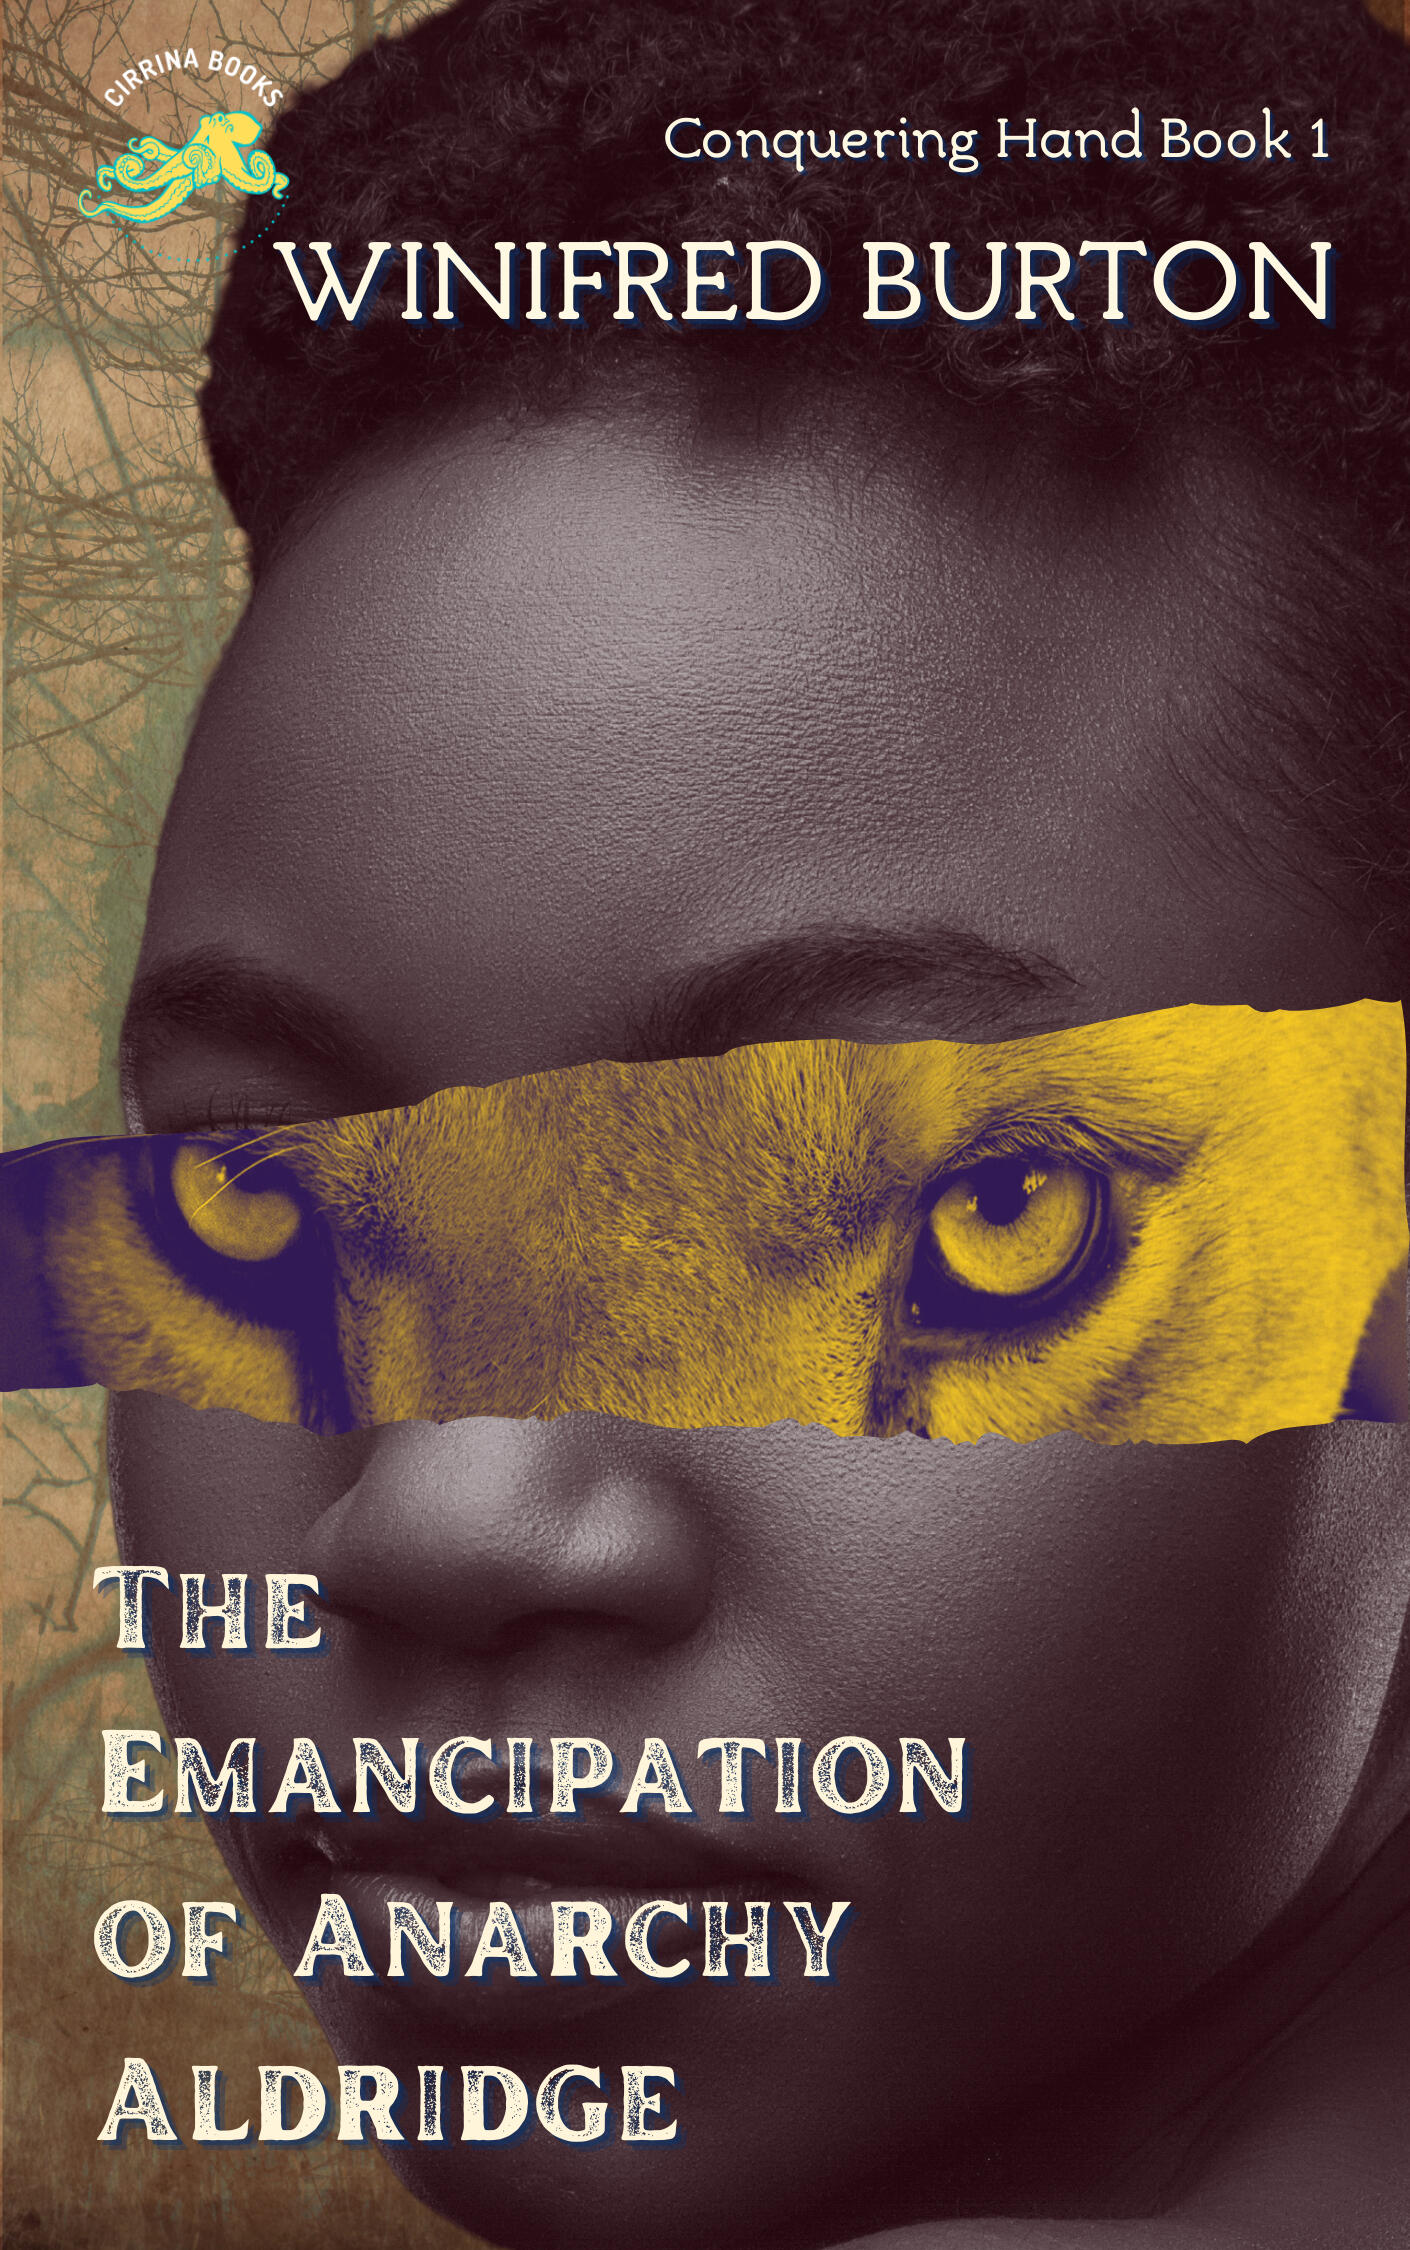 E-book cover for The Emancipation of Anarchy Aldridge by Winifred Burton with the title and author name in cream colored text over a sepia toned image of a Black woman with short natural hair down to her bare shoulder, with a rip across the part of her fac